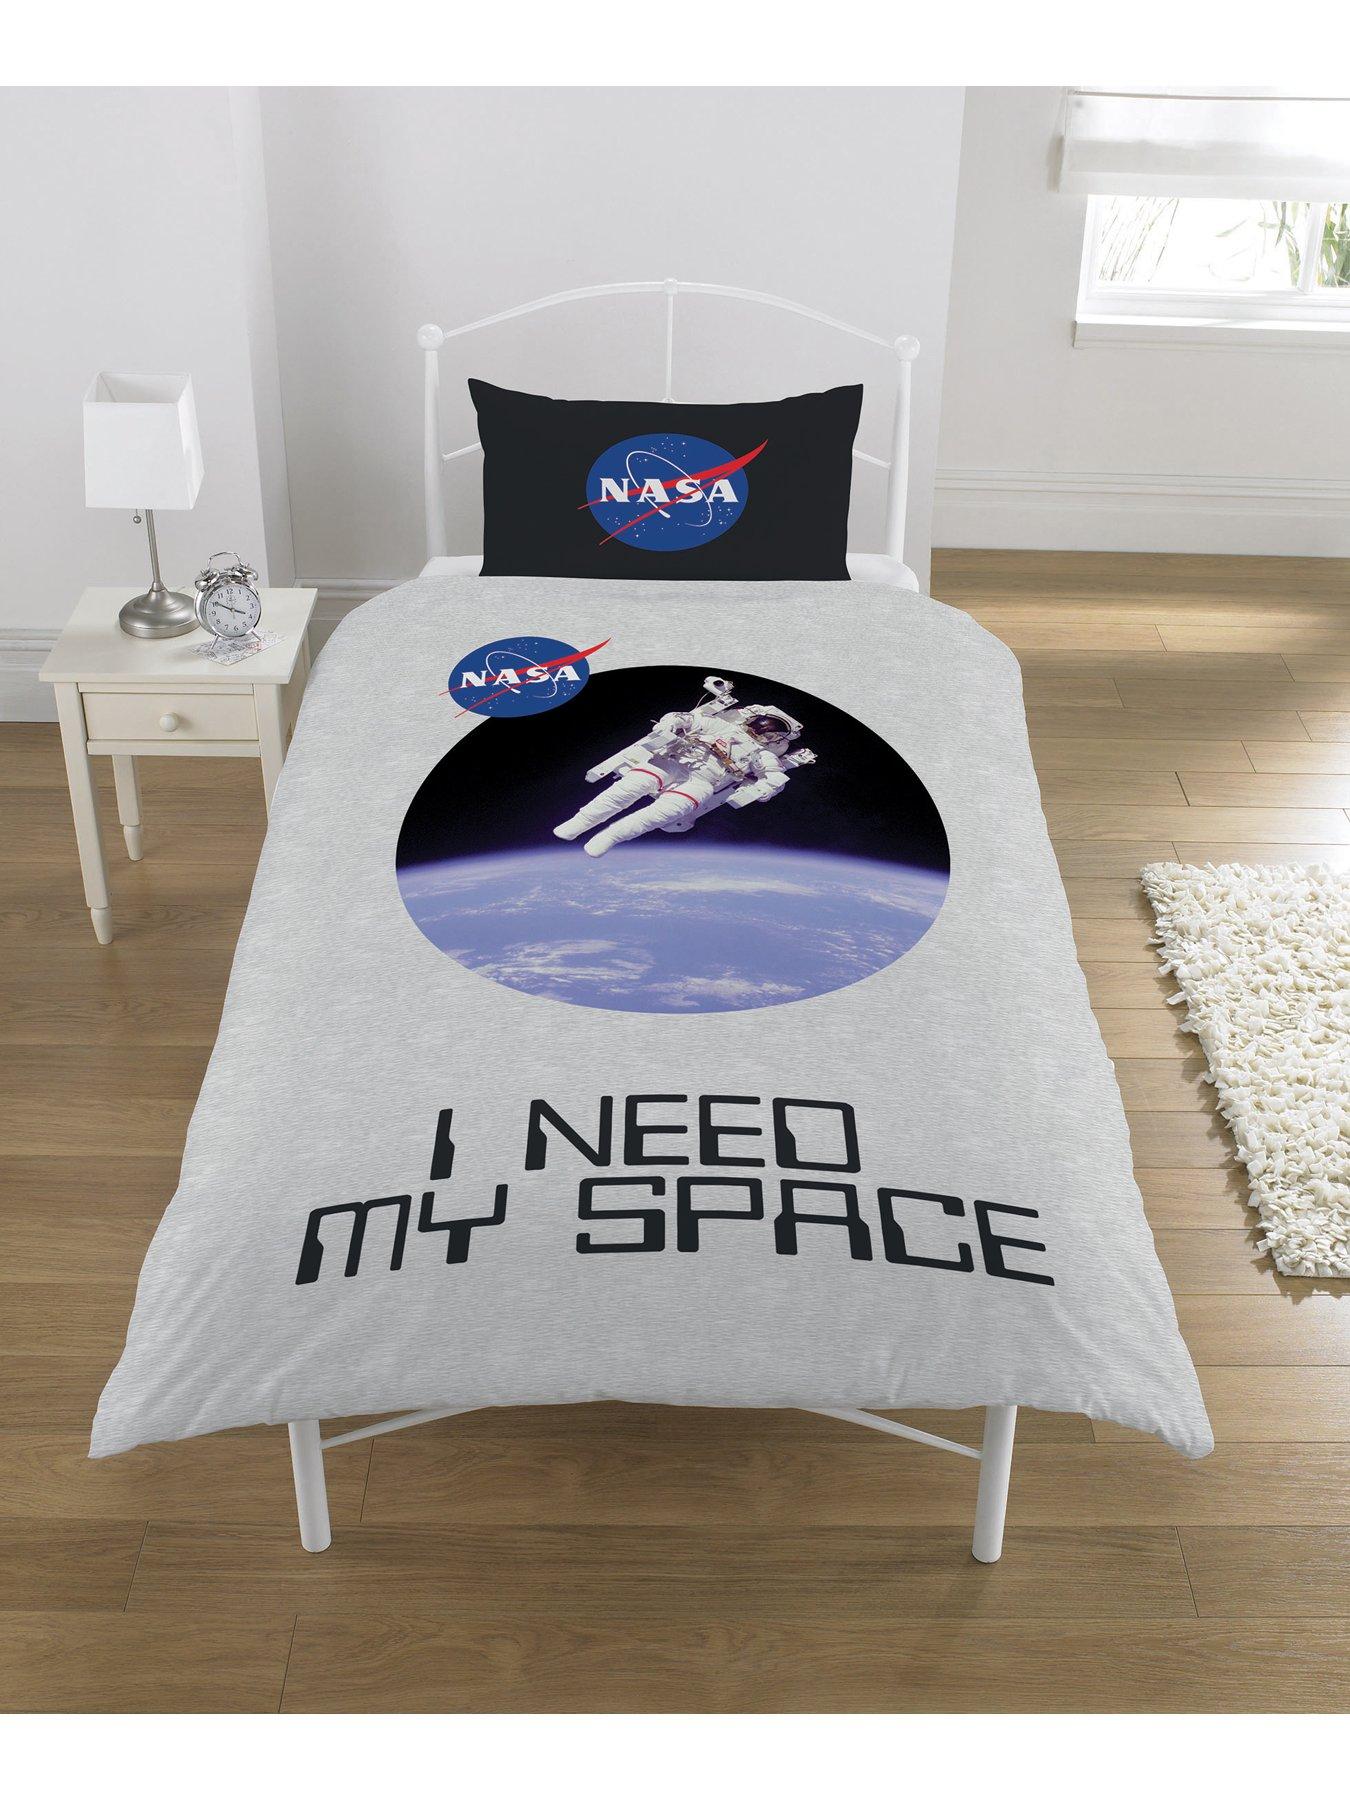 Children S Furniture Home Supplies Cot Bed Duvet Covers Nasa